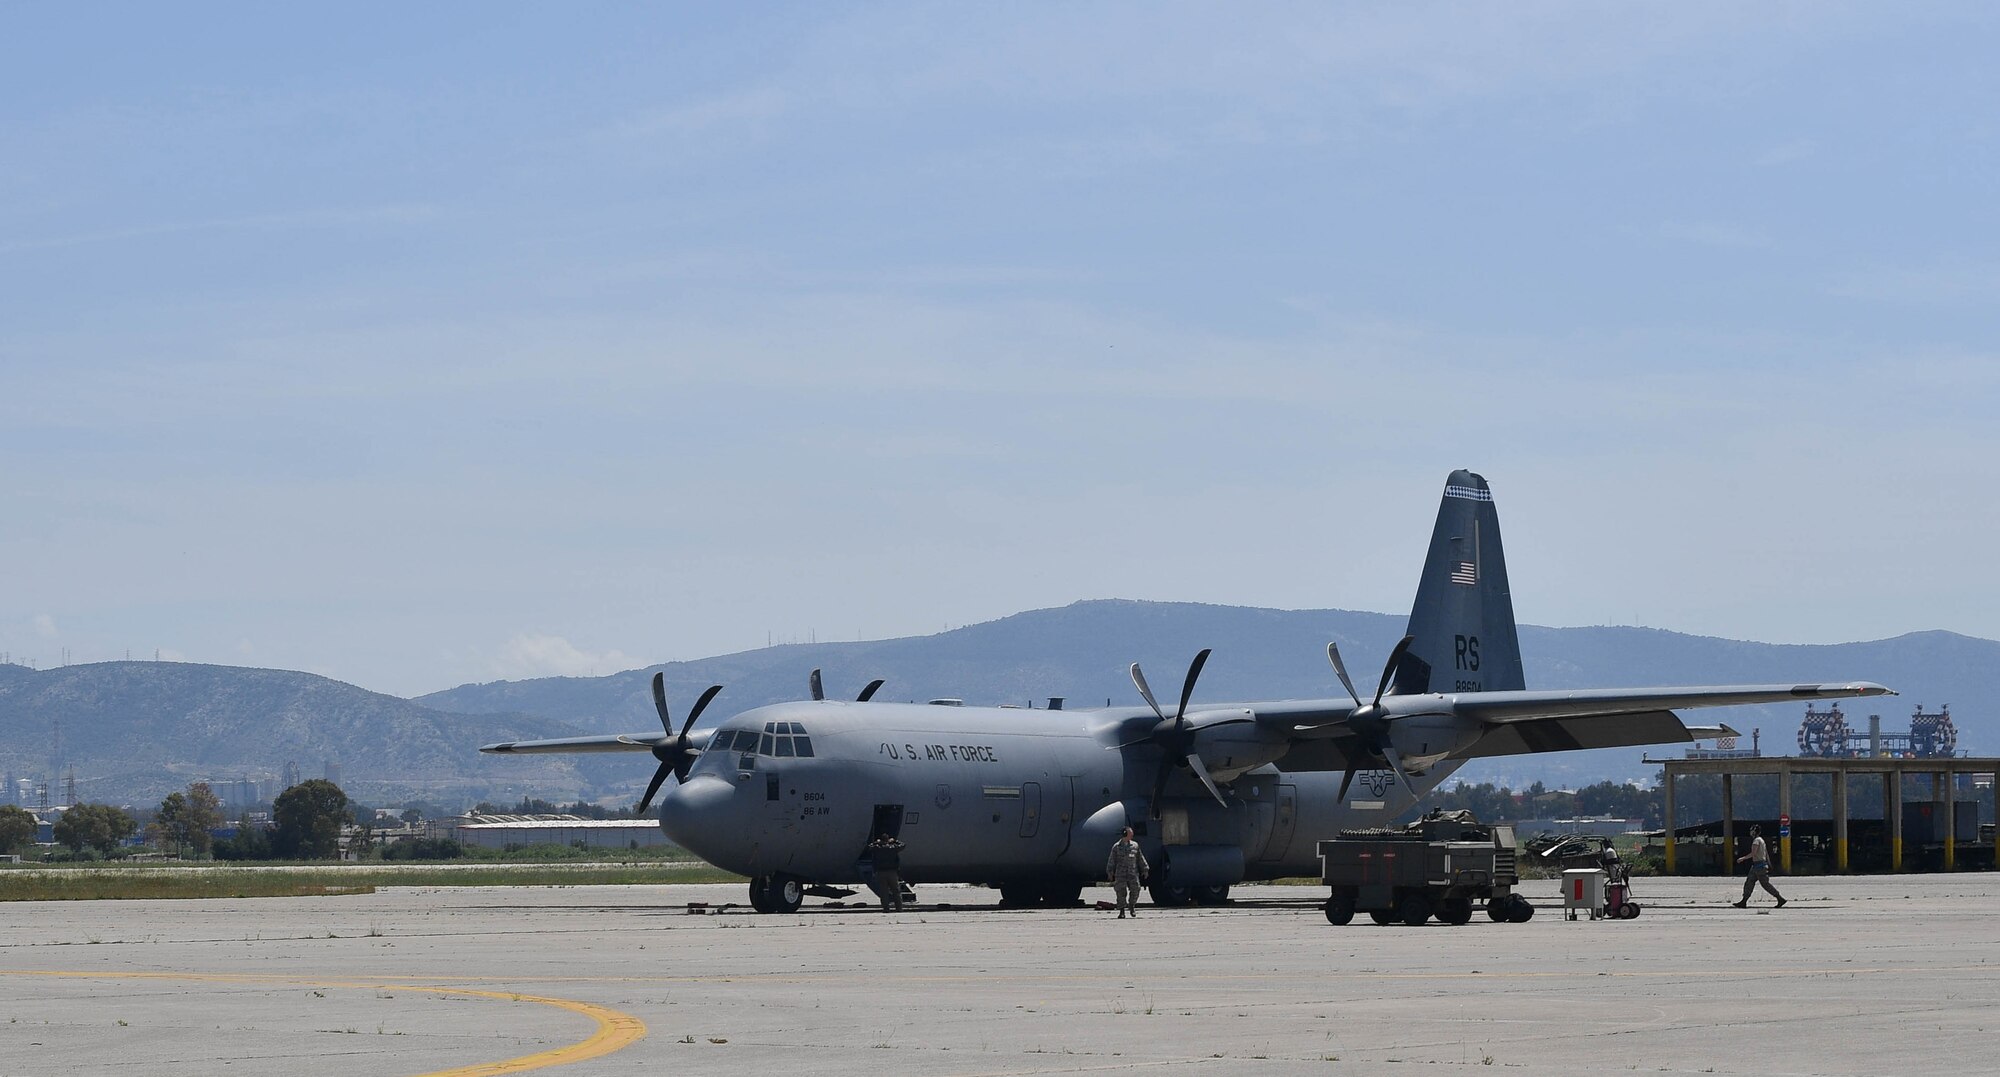 A C-130J Super Hercules is parked on the flight line at Elefsis Air Base, Greece, April 19, 2017. Approximately 110 Airmen and three C-130J Super Hercules aircraft from the 86th Airlift Wing’s 37th Airlift Squadron, Ramstein Air Base, Germany, will participate in Exercise Stolen Cerberus IV with the Hellenic air force and the U.S. Army till April 28. (U.S Air Force photo by Senior Airman Tryphena Mayhugh)